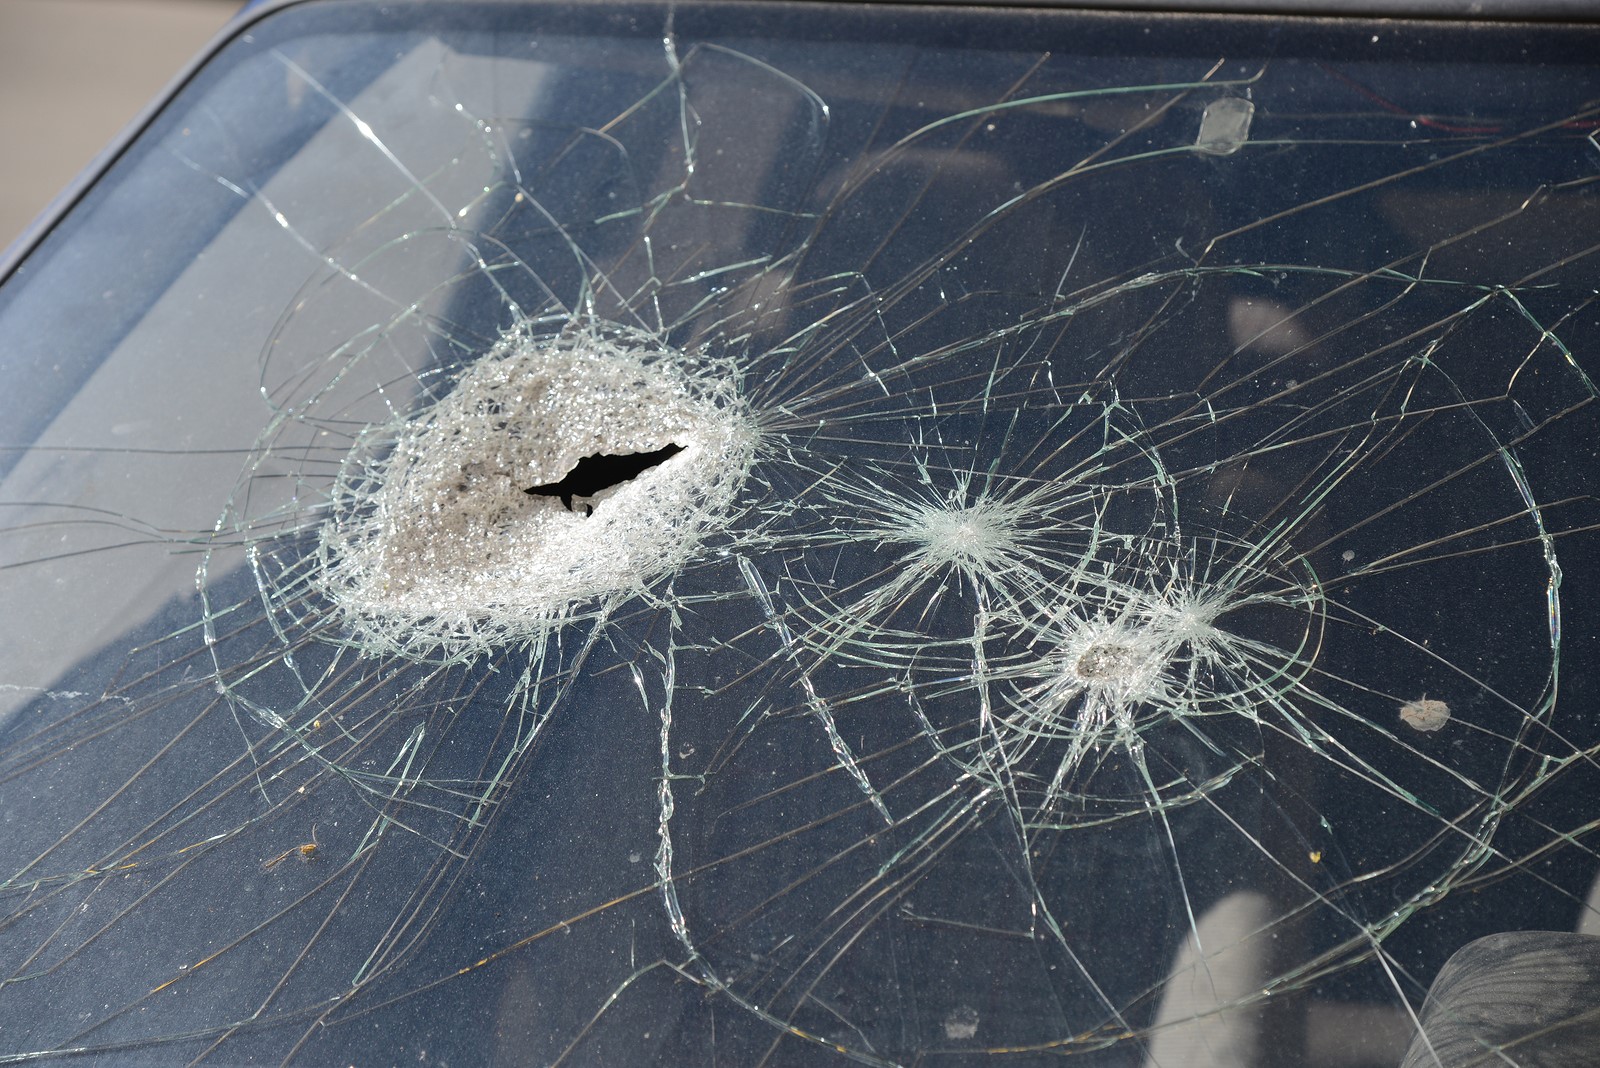 Bellevue Auto Glass Repair: How to Stop Windshield Cracks from Growing